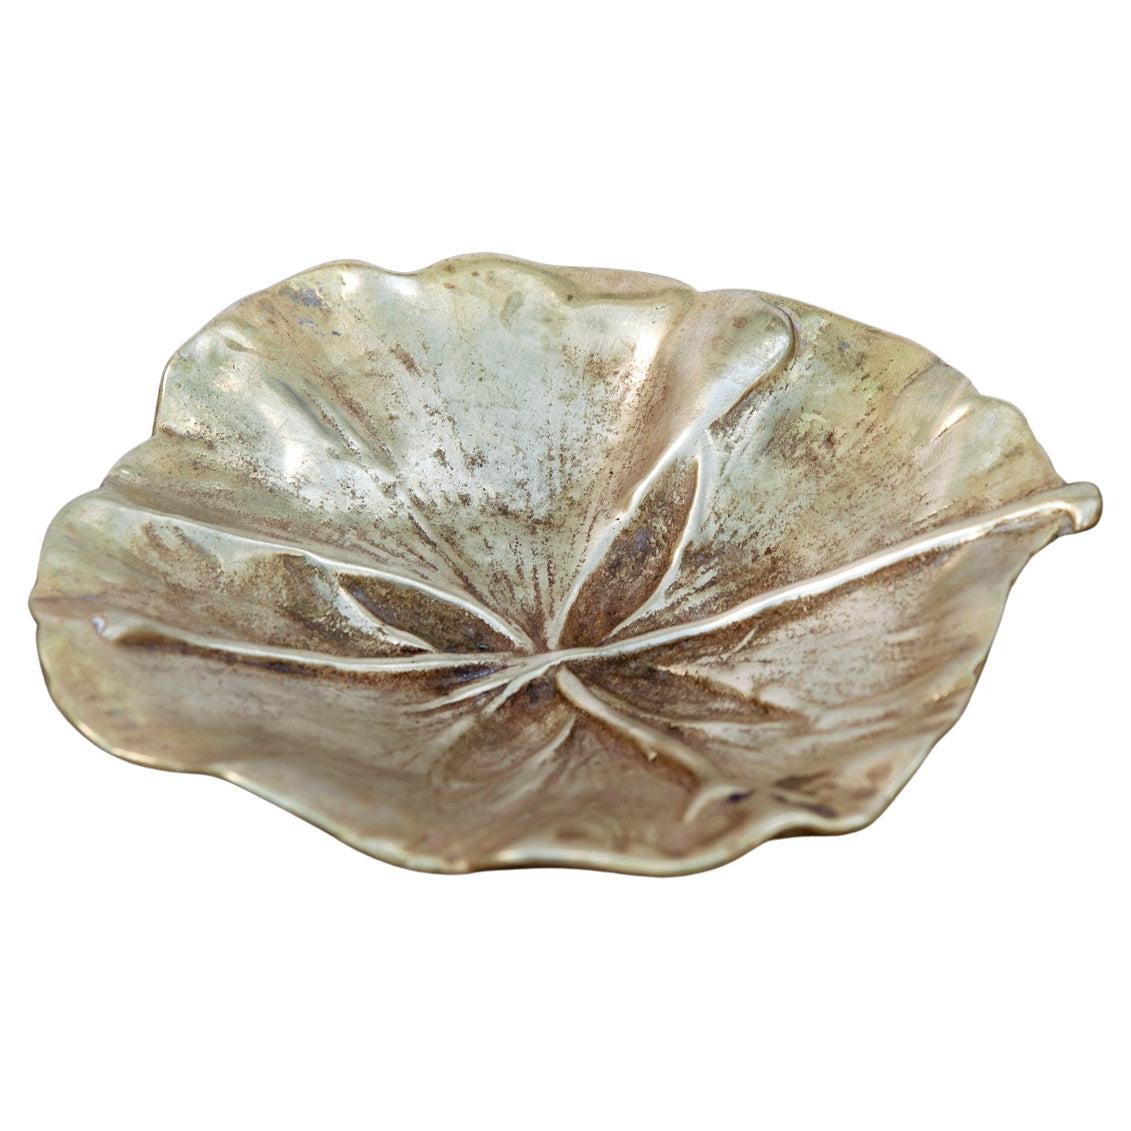 Mid century cast brass leaf tray by Virginia Metalcrafters.
Stamped 